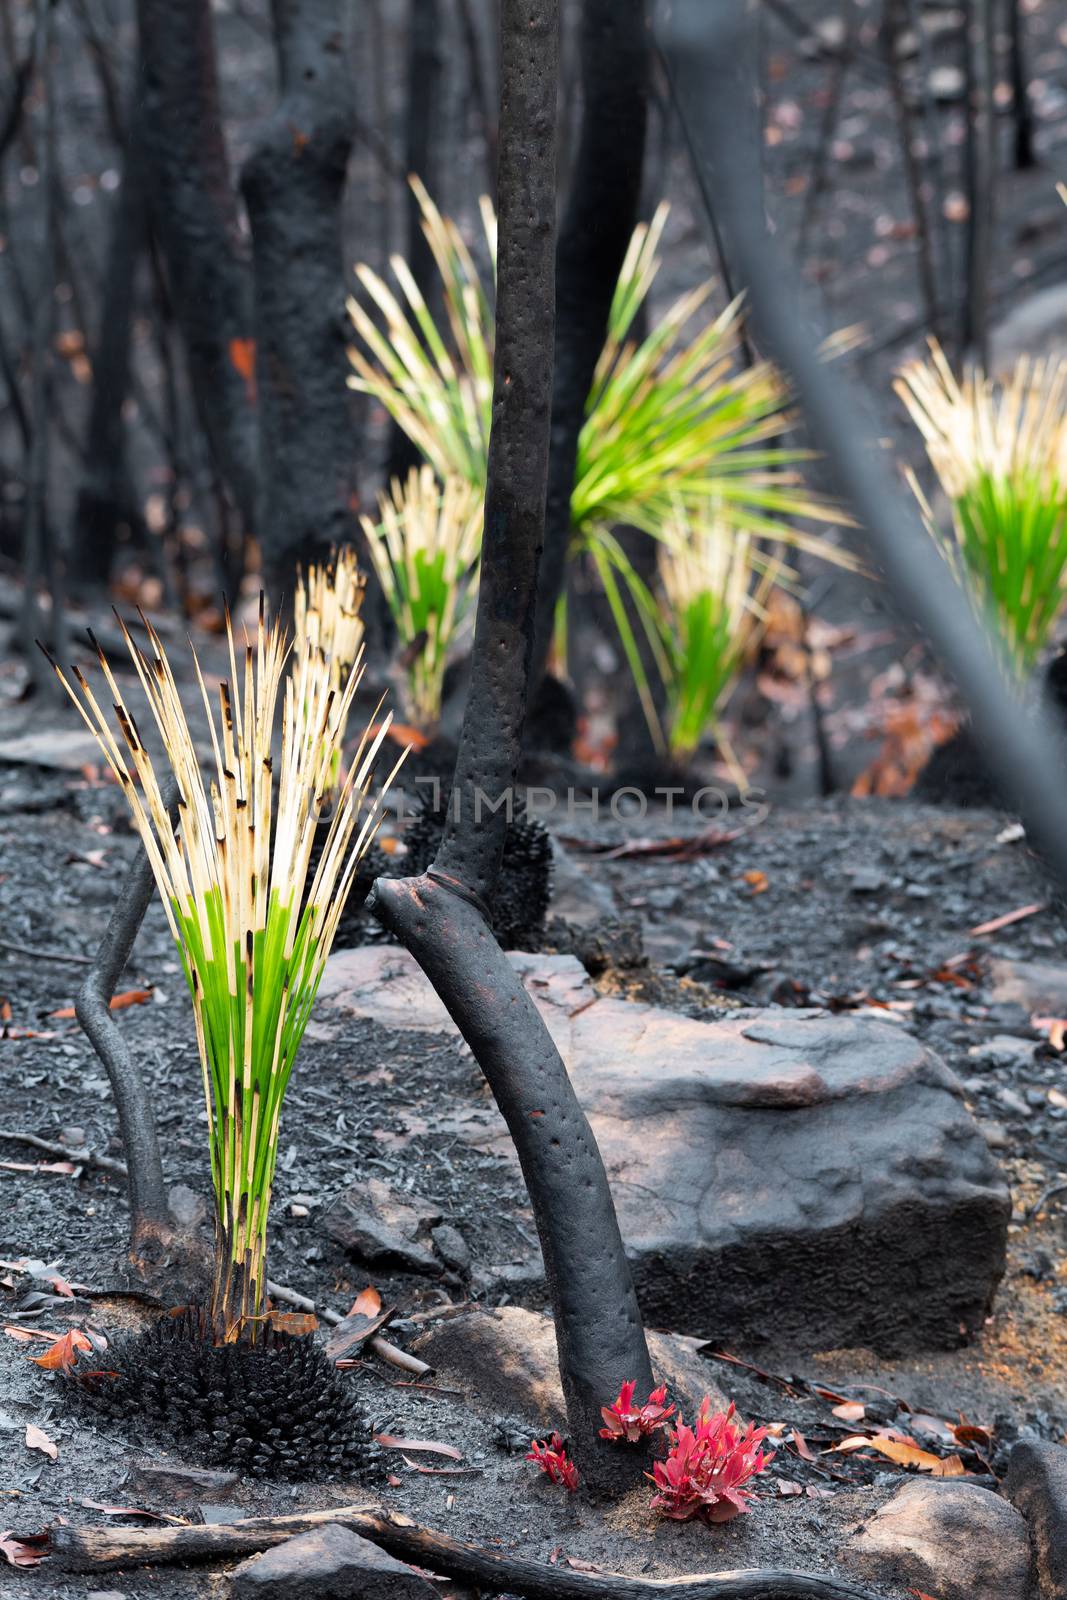 Fireproof grass trees, have a resin that resists the heat blast of the fire and will flower profusely soon after a fire providing  much needed food for animals and insects.  The blackened trees also withstand the fire, and start bursting forth with fresh new growth up and down the tree trunks